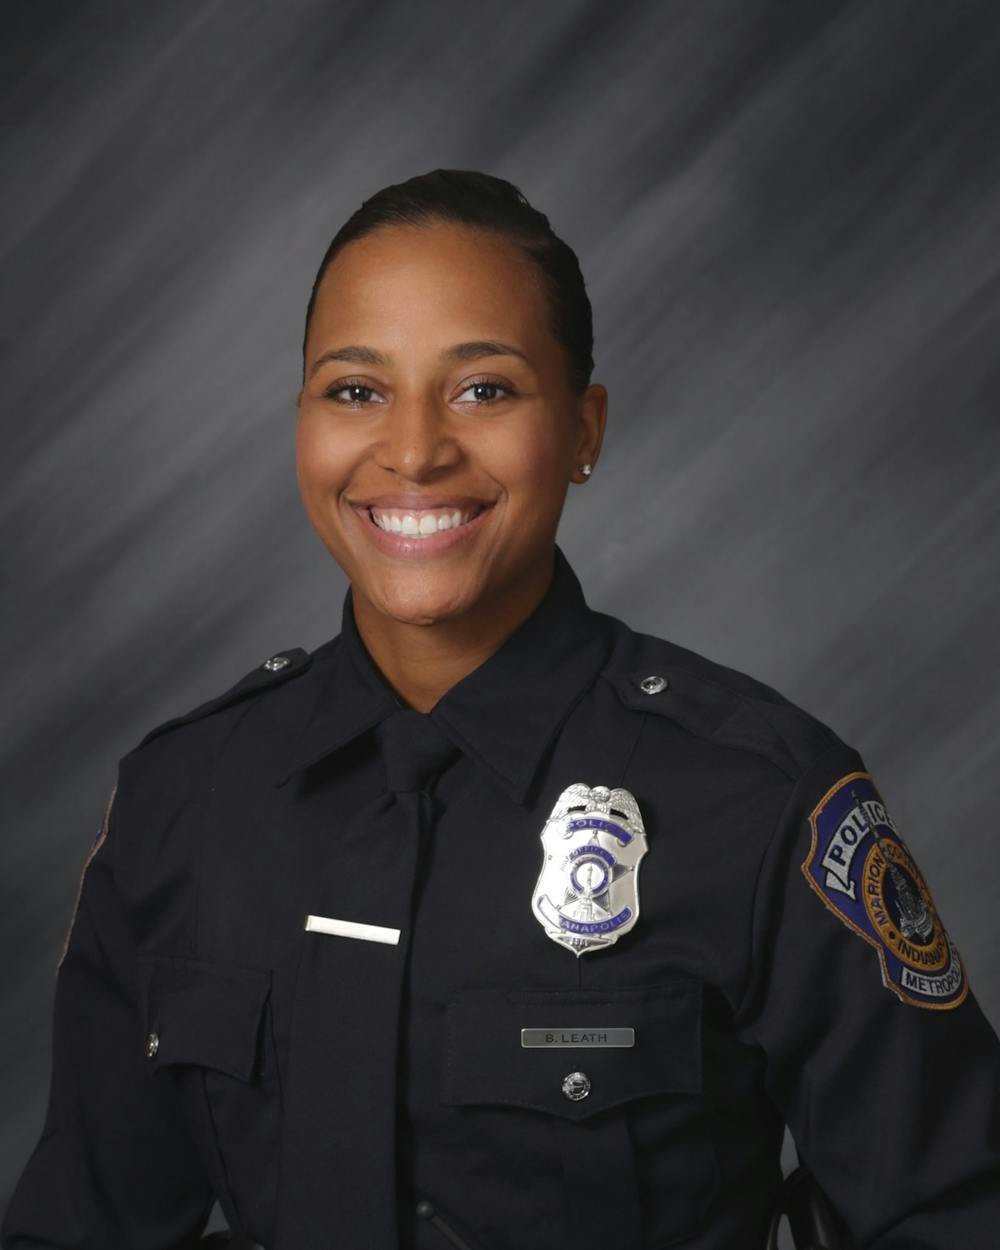 <p>Officer Breann Leath, 24, was shot at an apartment complex on the city’s far east side. Leath died at Eskanazi Hospital. <strong>Indianapolis Metropolitan Police Department, Photo Courtesy</strong></p>